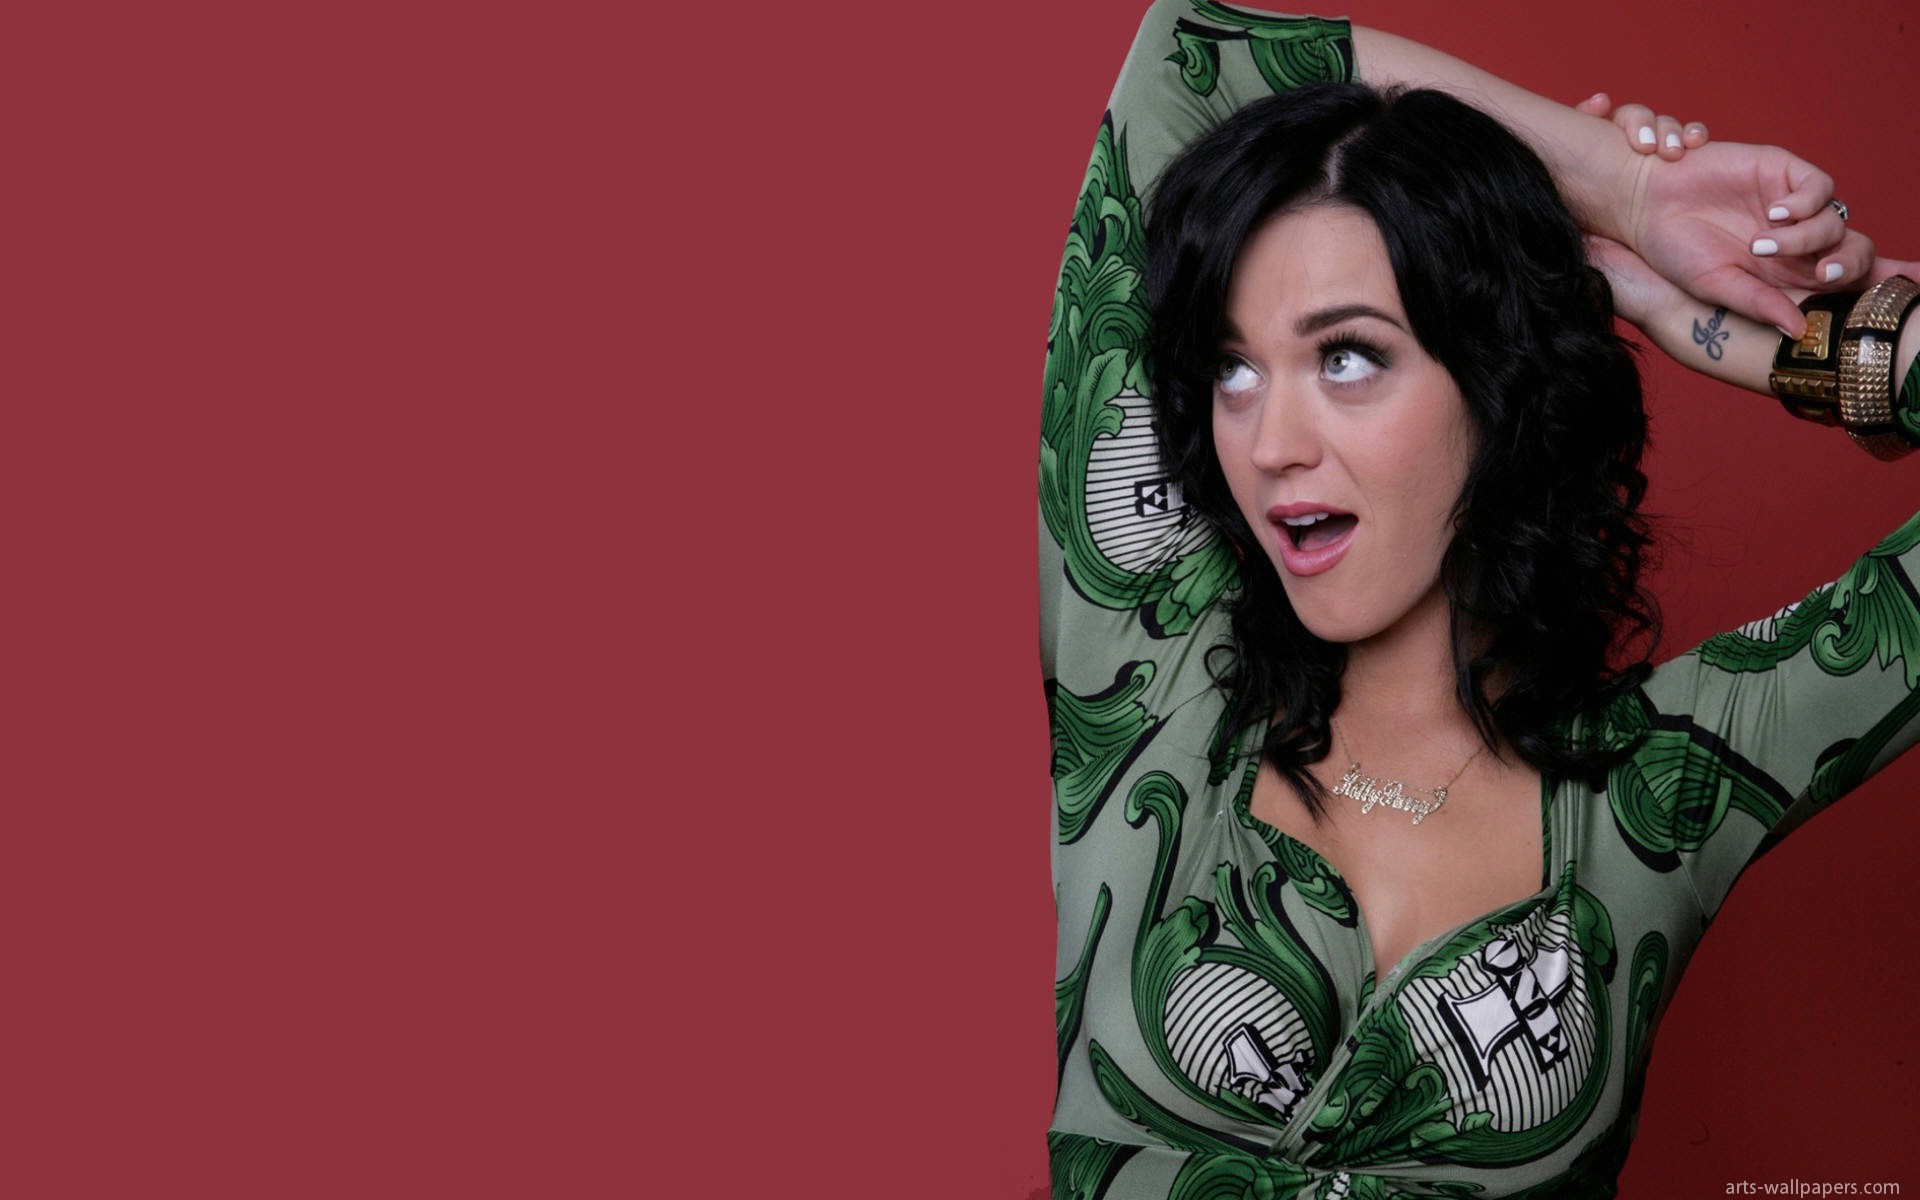 100+] Katy Perry Wallpapers | Wallpapers.com